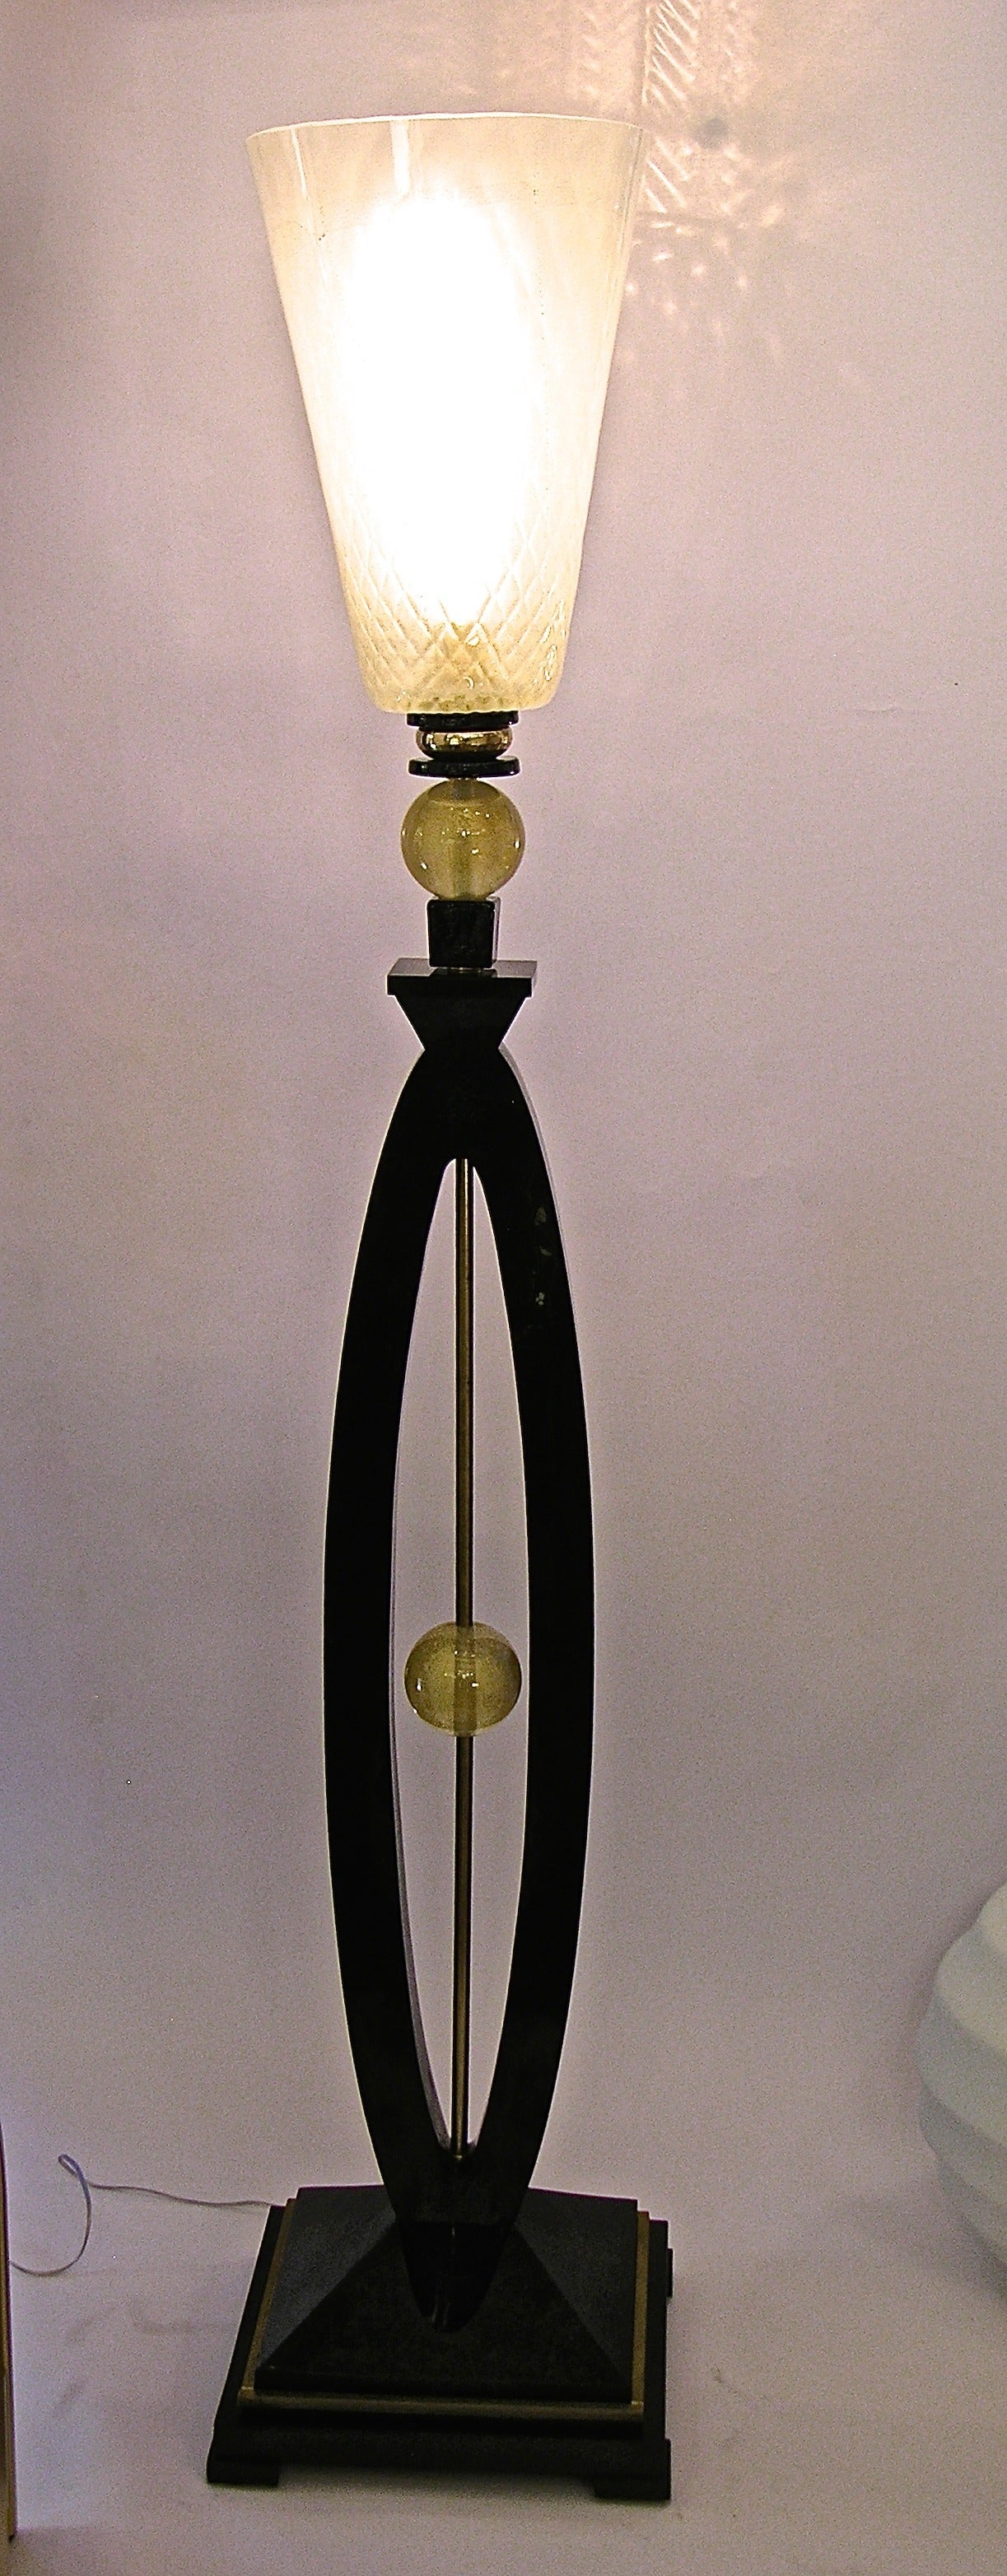 Hand-Crafted 1970s 1970s Art Deco Design Pair of Italian Gold Black and White Floor Lamps